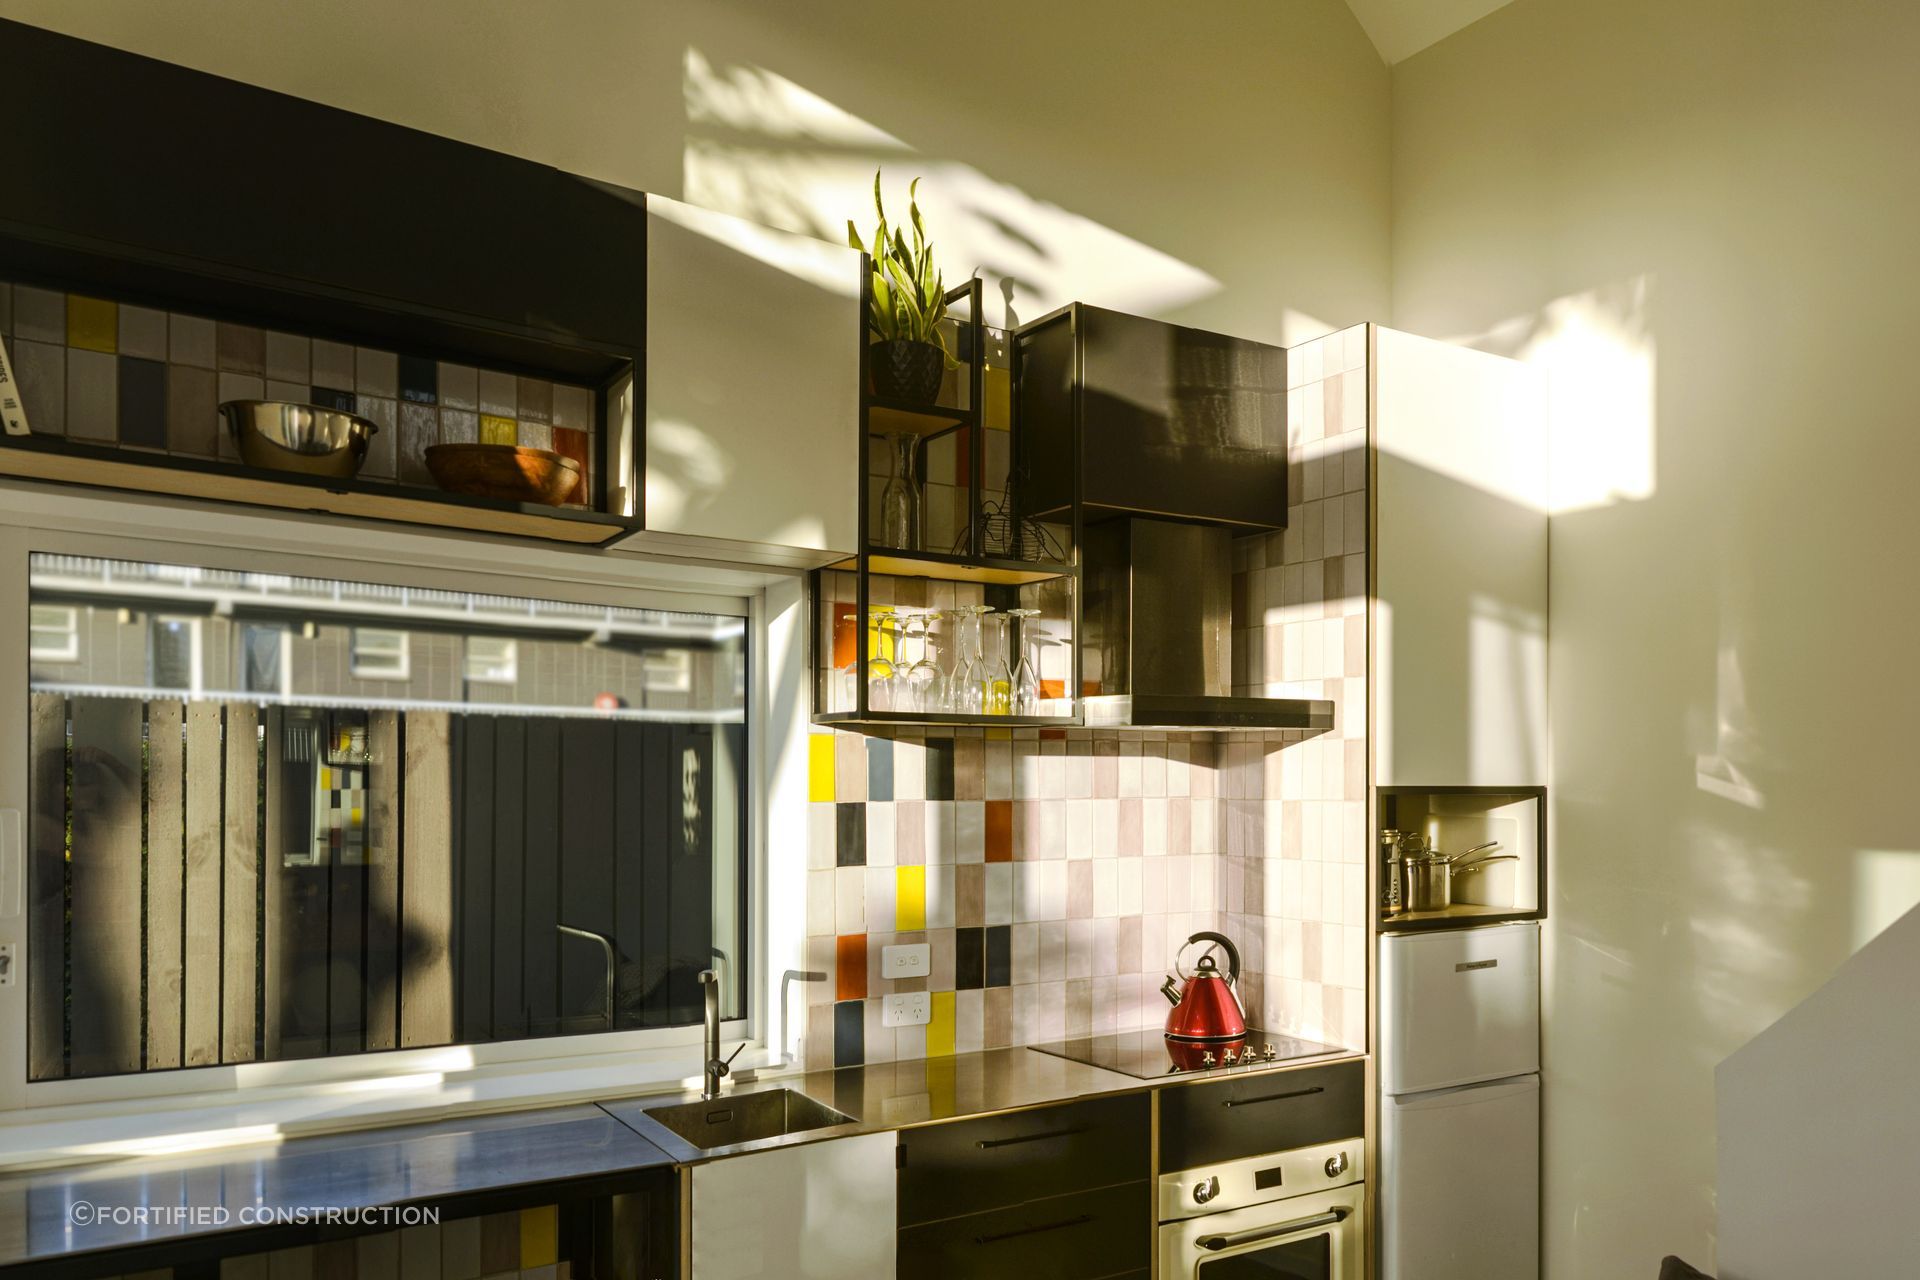 Coloured tiles accent the kitchen, juxtaposed with the monochrome cabinets, giving the room a pop of personality.